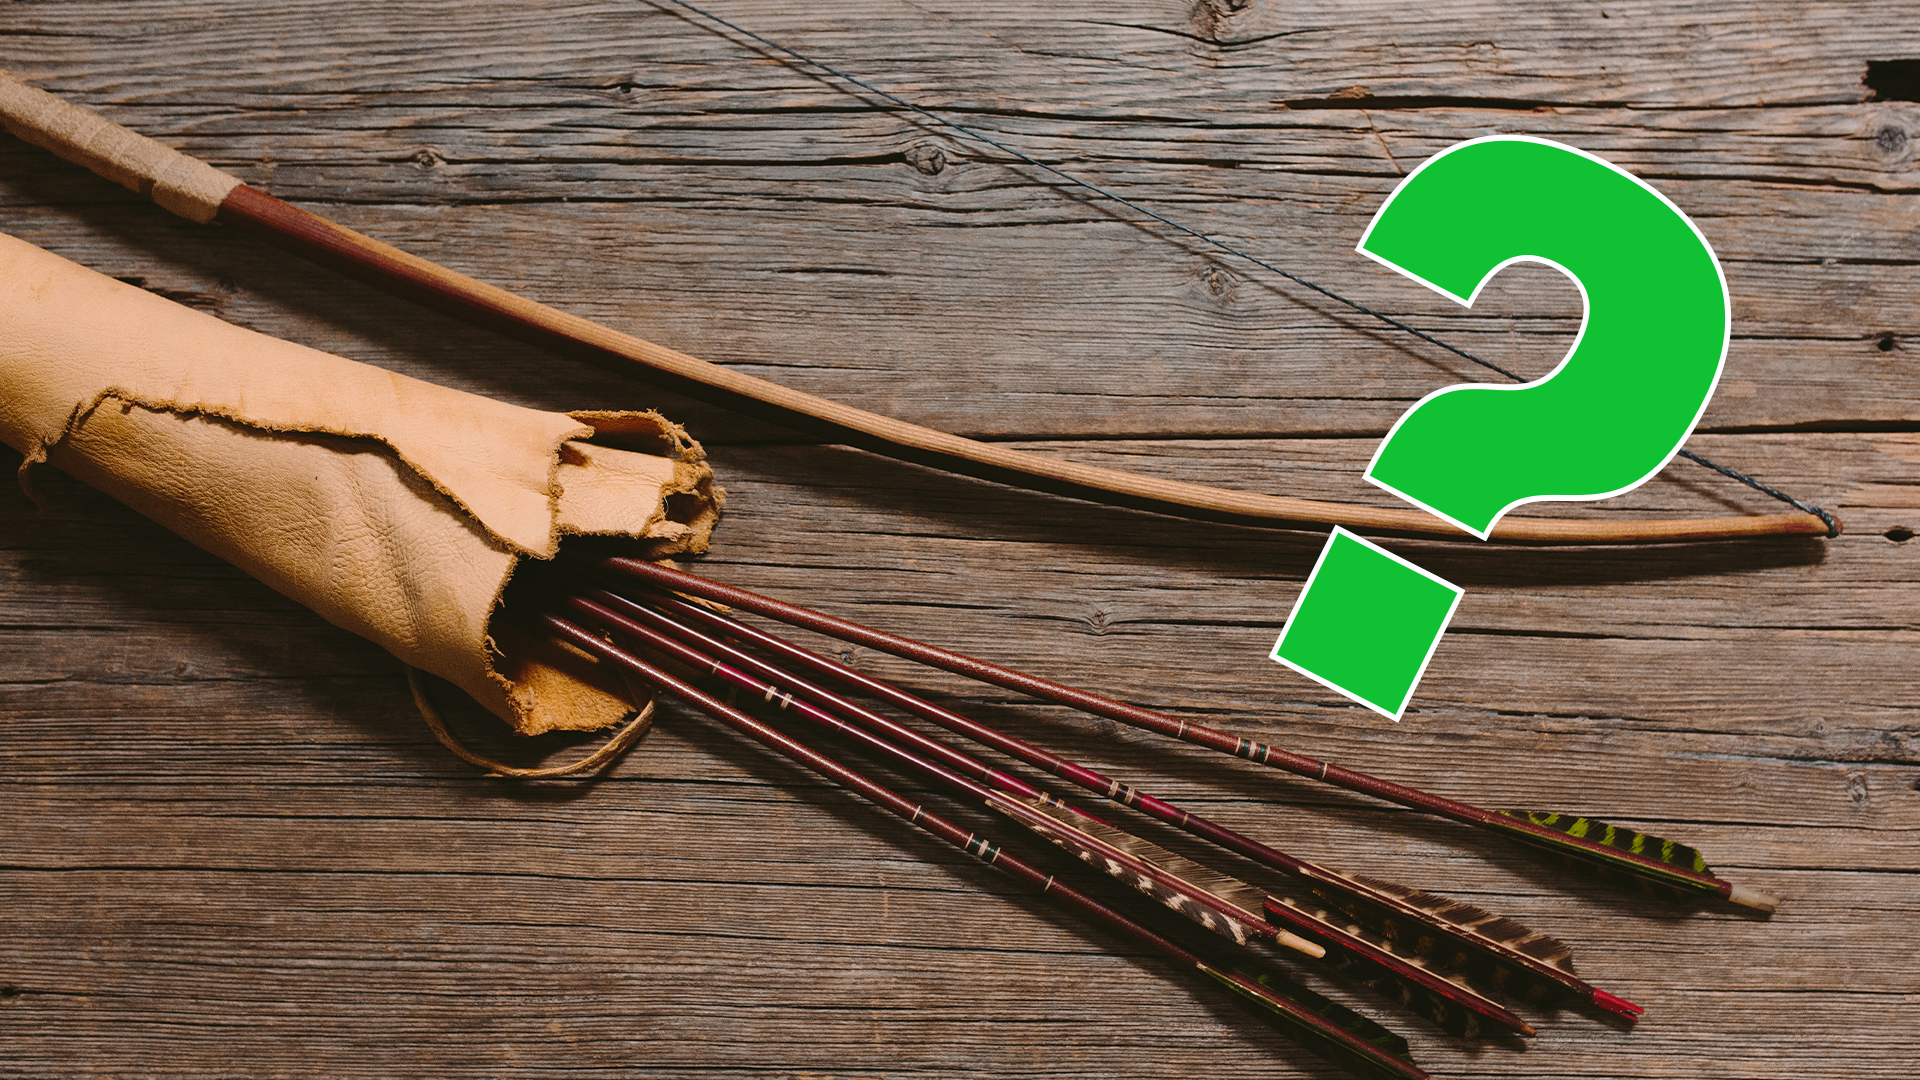 Bow and arrows on wooden background with green question mark